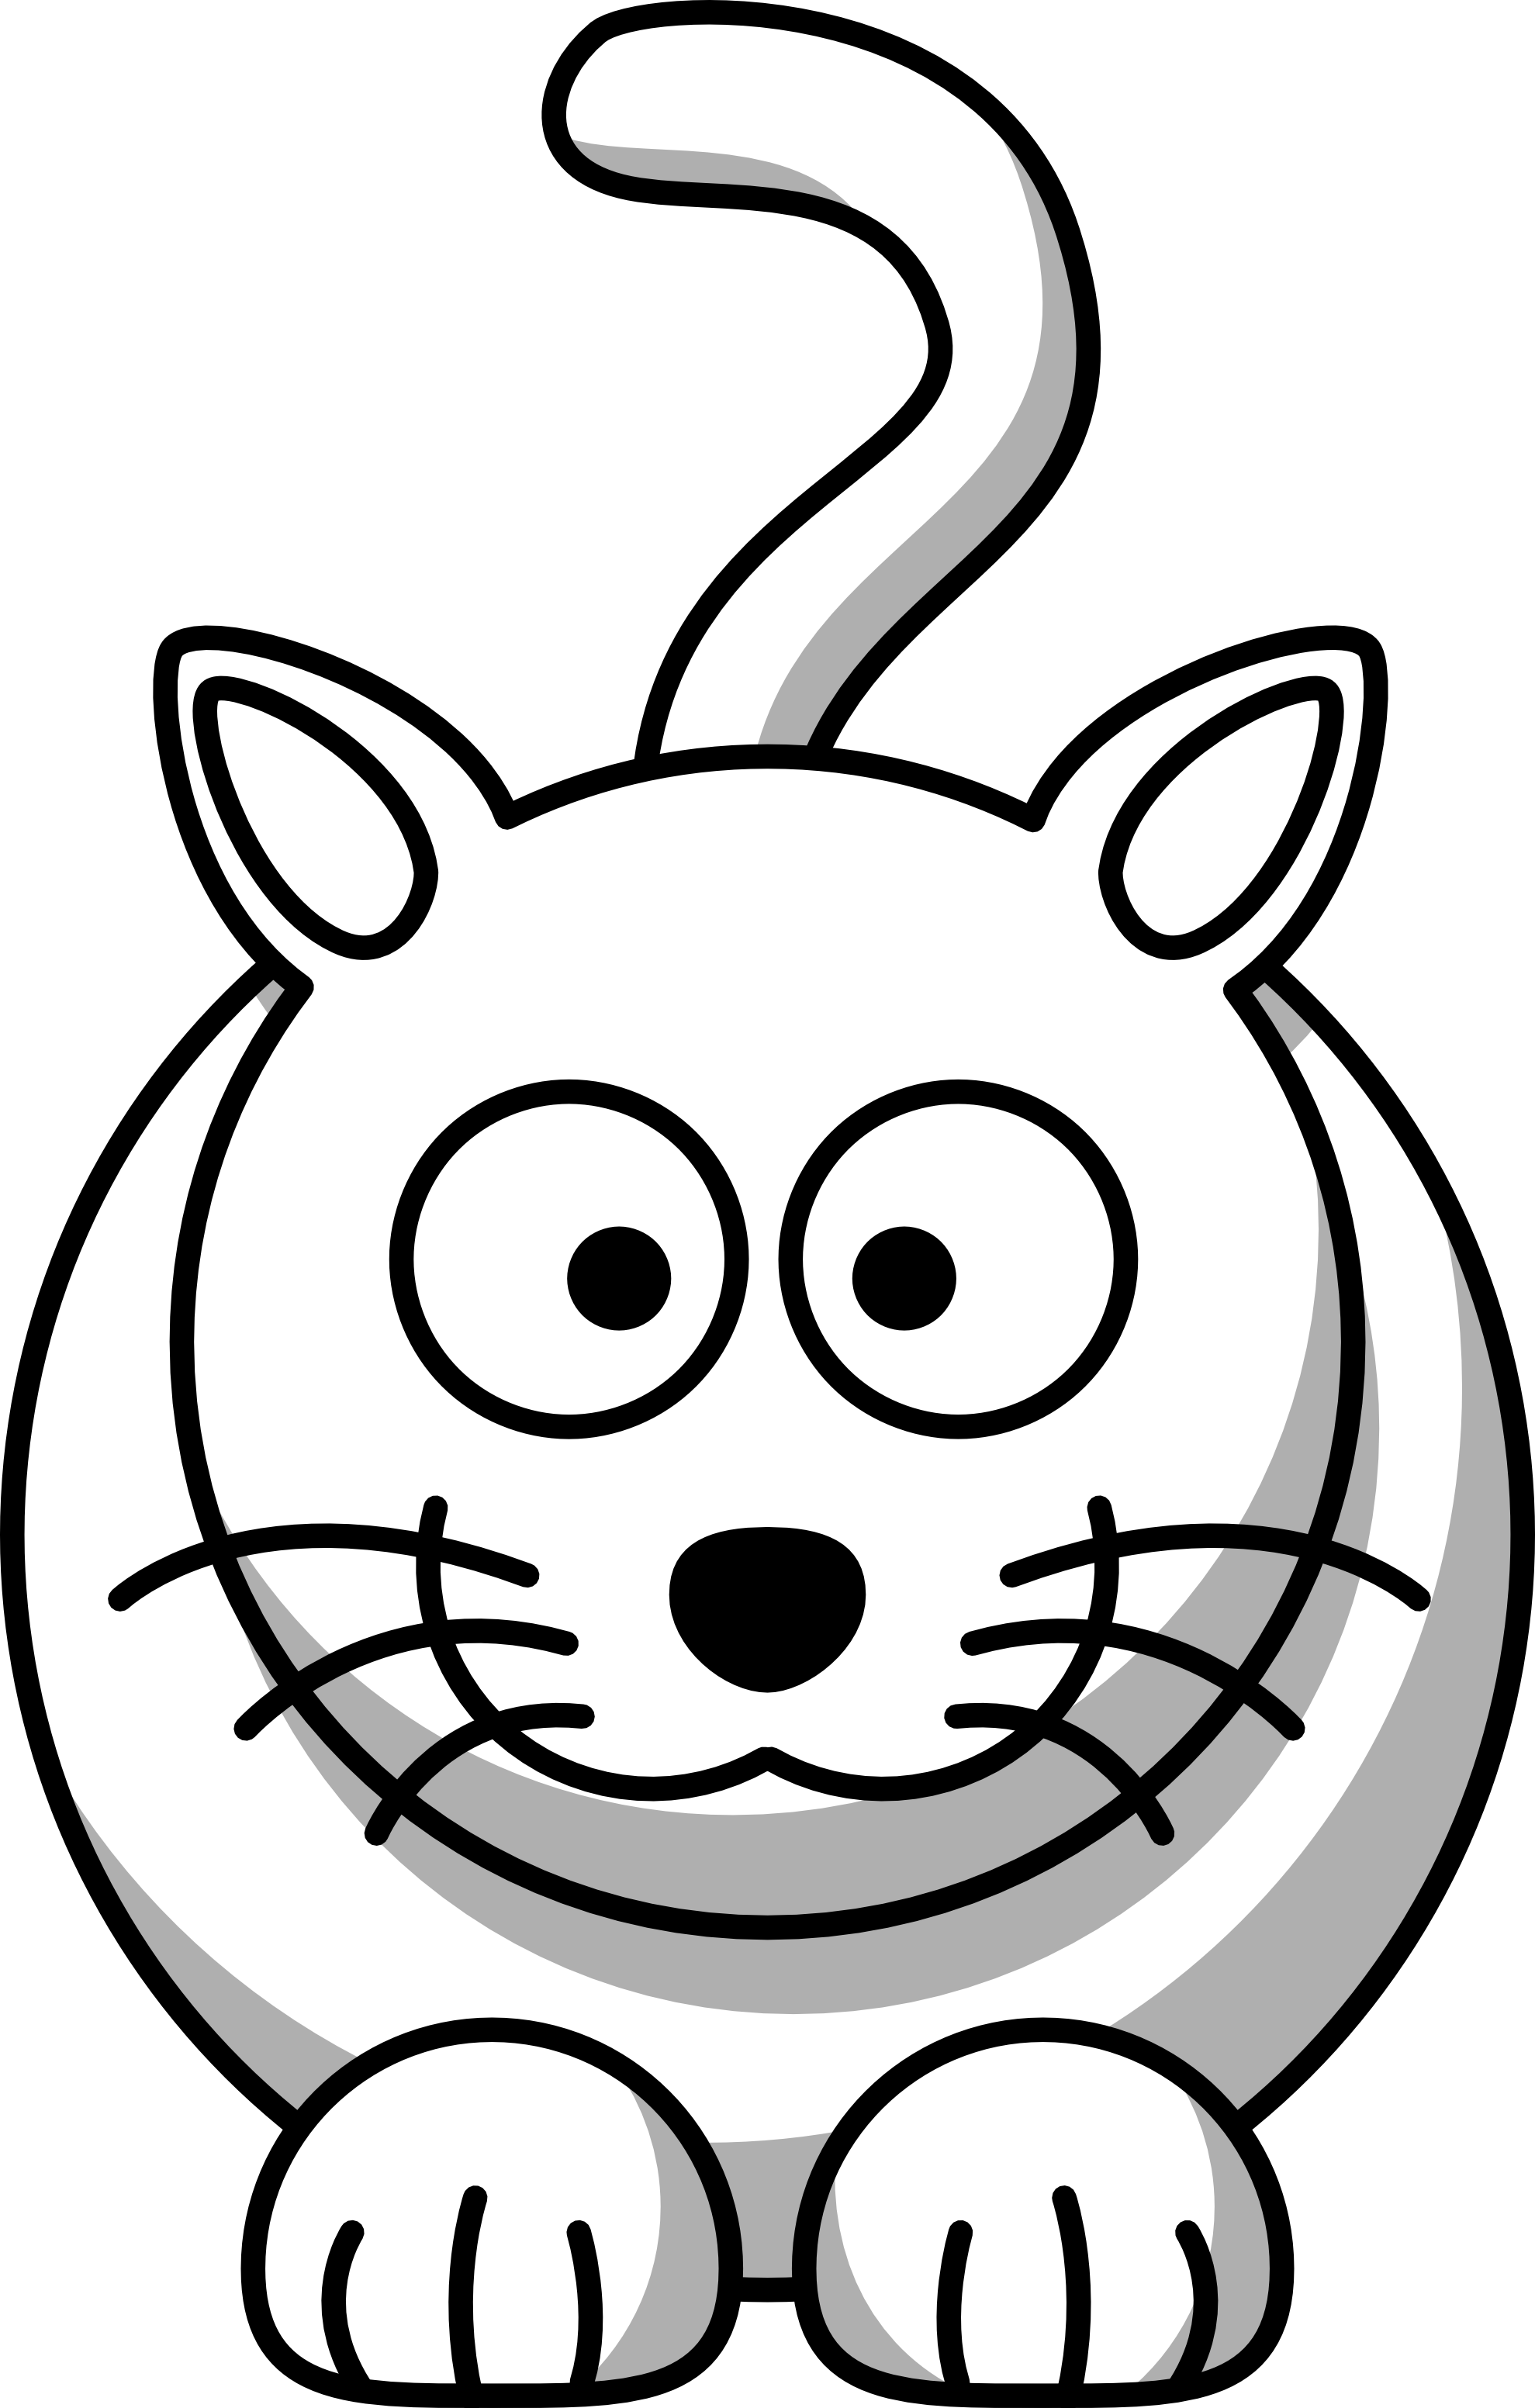 Cartoon Animals Black And White Pictures 5 HD Wallpapers | amagico.